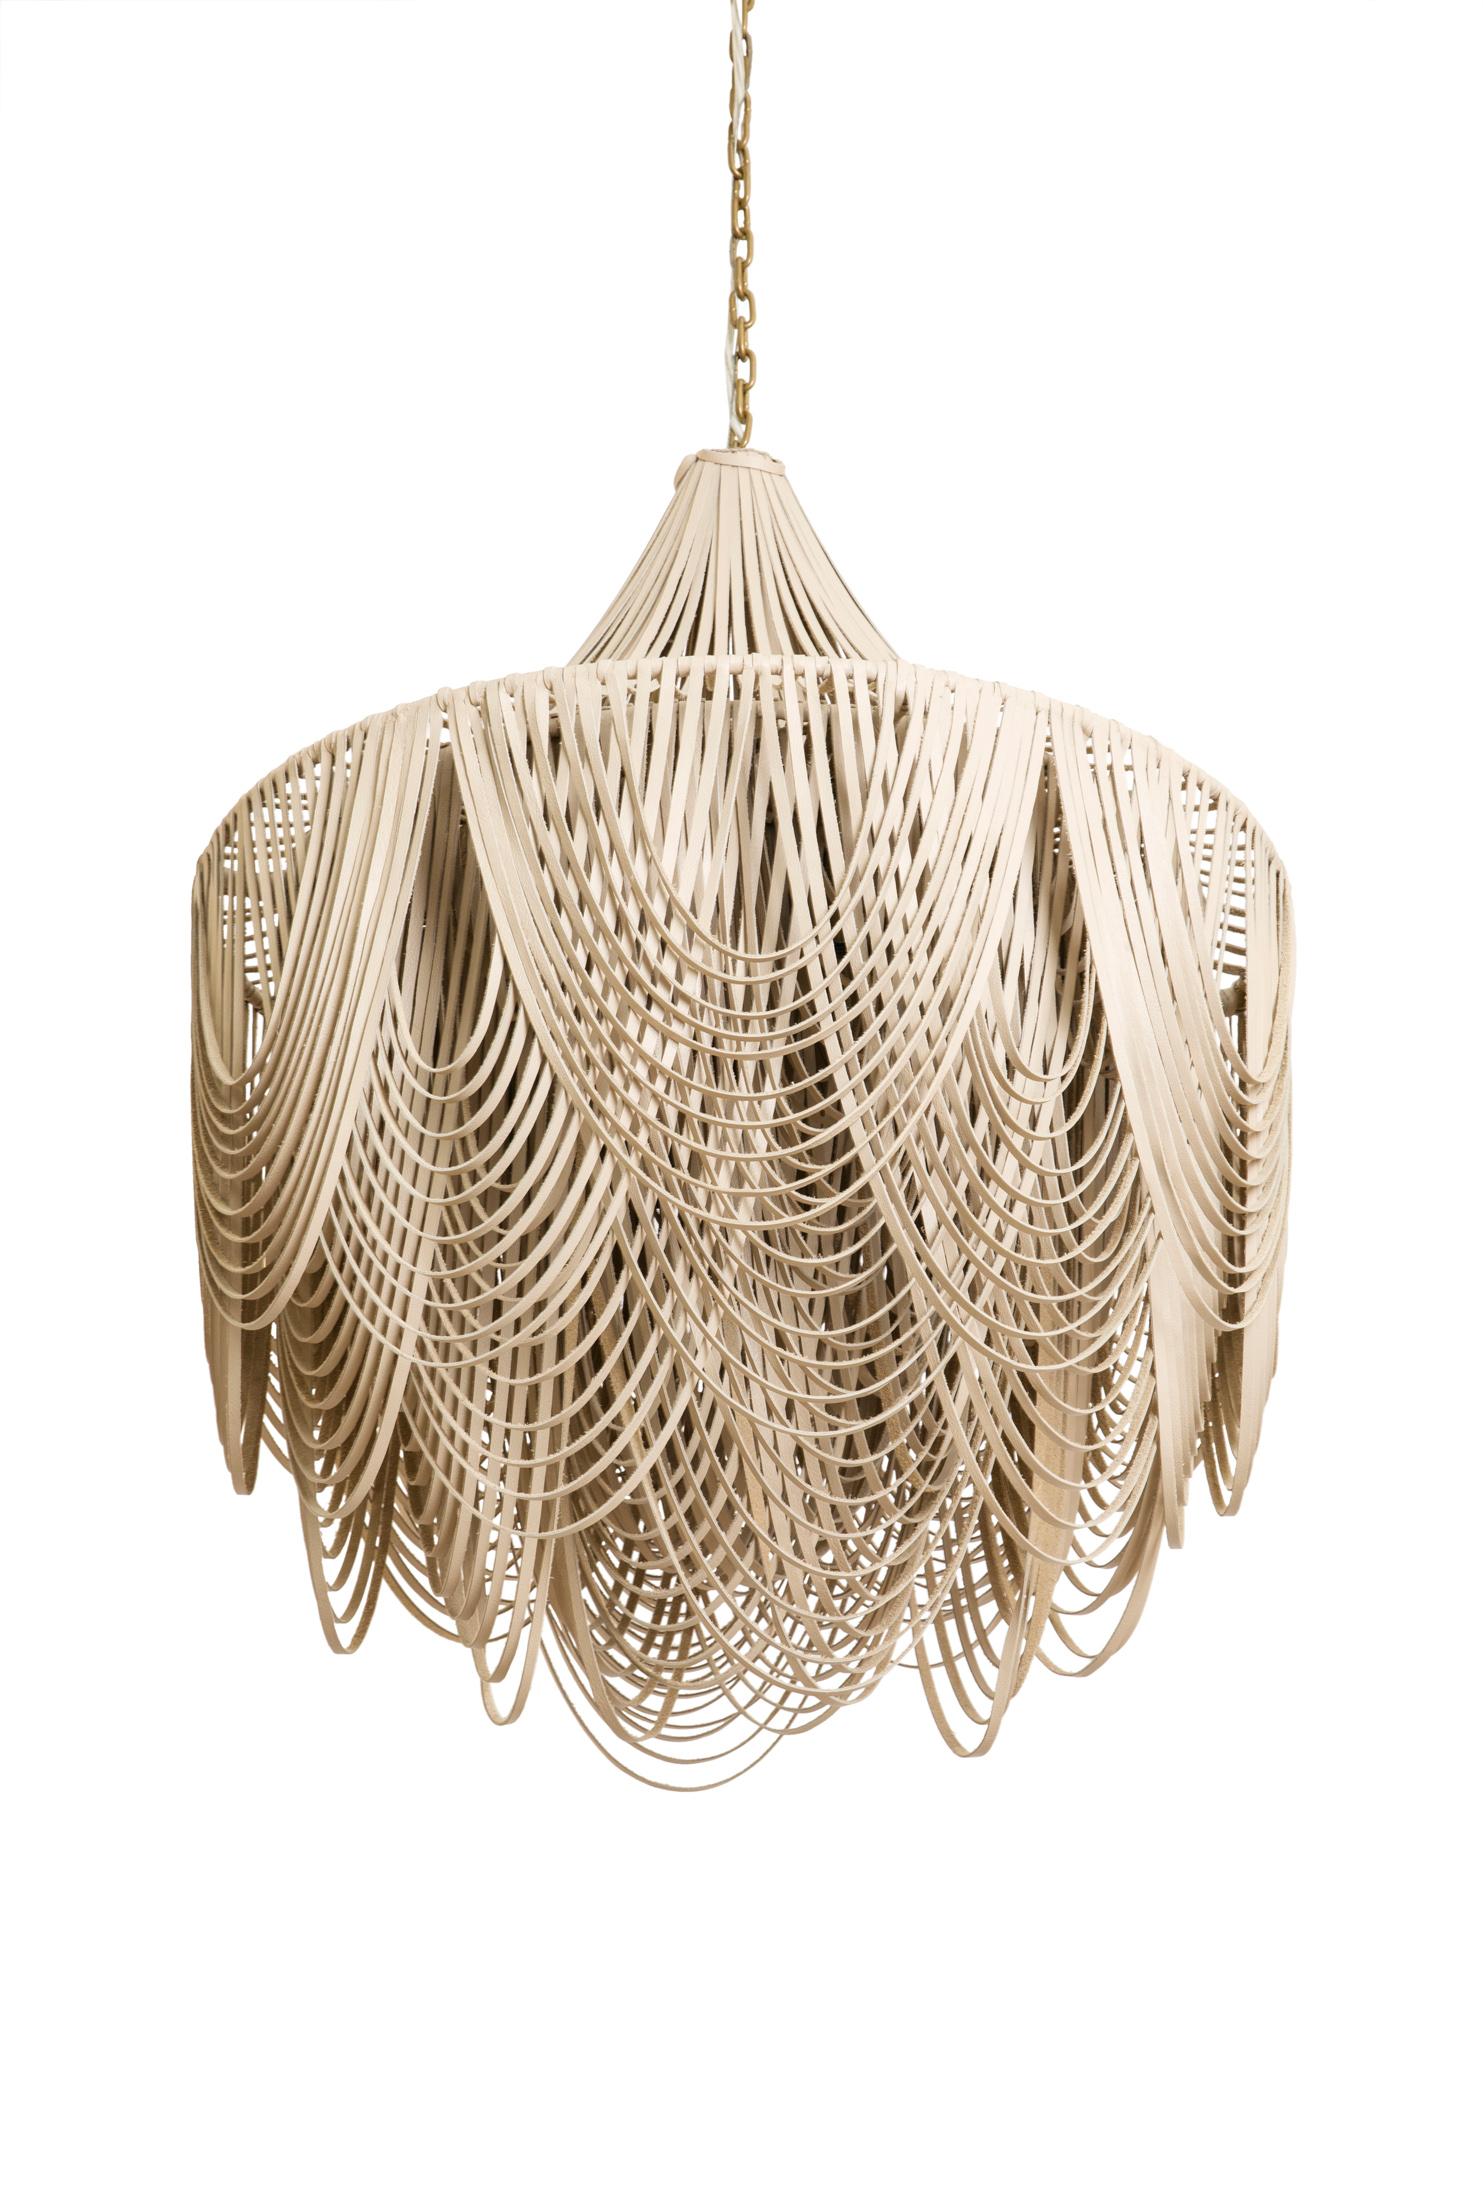 Each chandelier is hand- made with varying lengths of stripped leather, creating layers of movement and texture. The ambient light from within the fixture emerges into the room in a soft glow. All hard-wired lighting is UL-listed for dry locations.